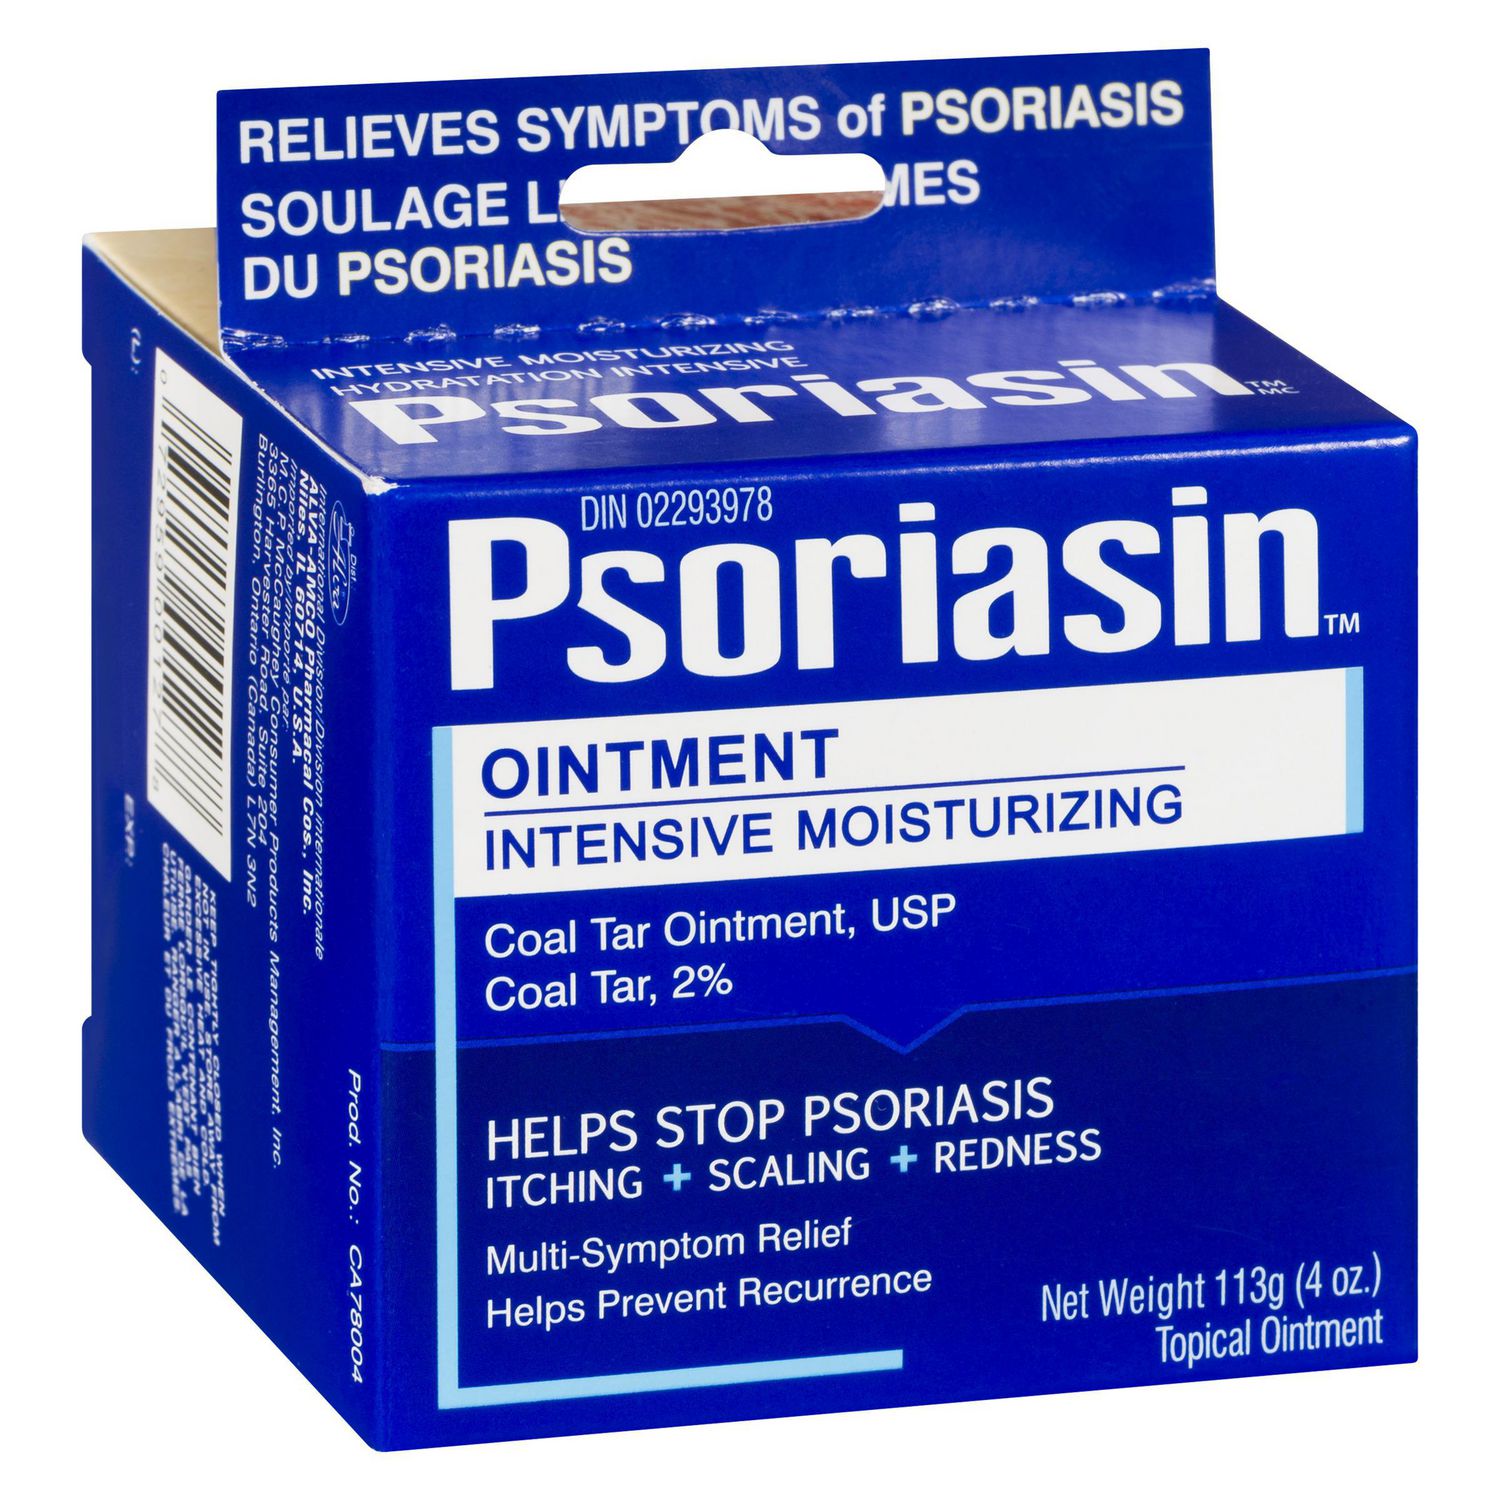 psoriasin ointment shoppers drug mart)